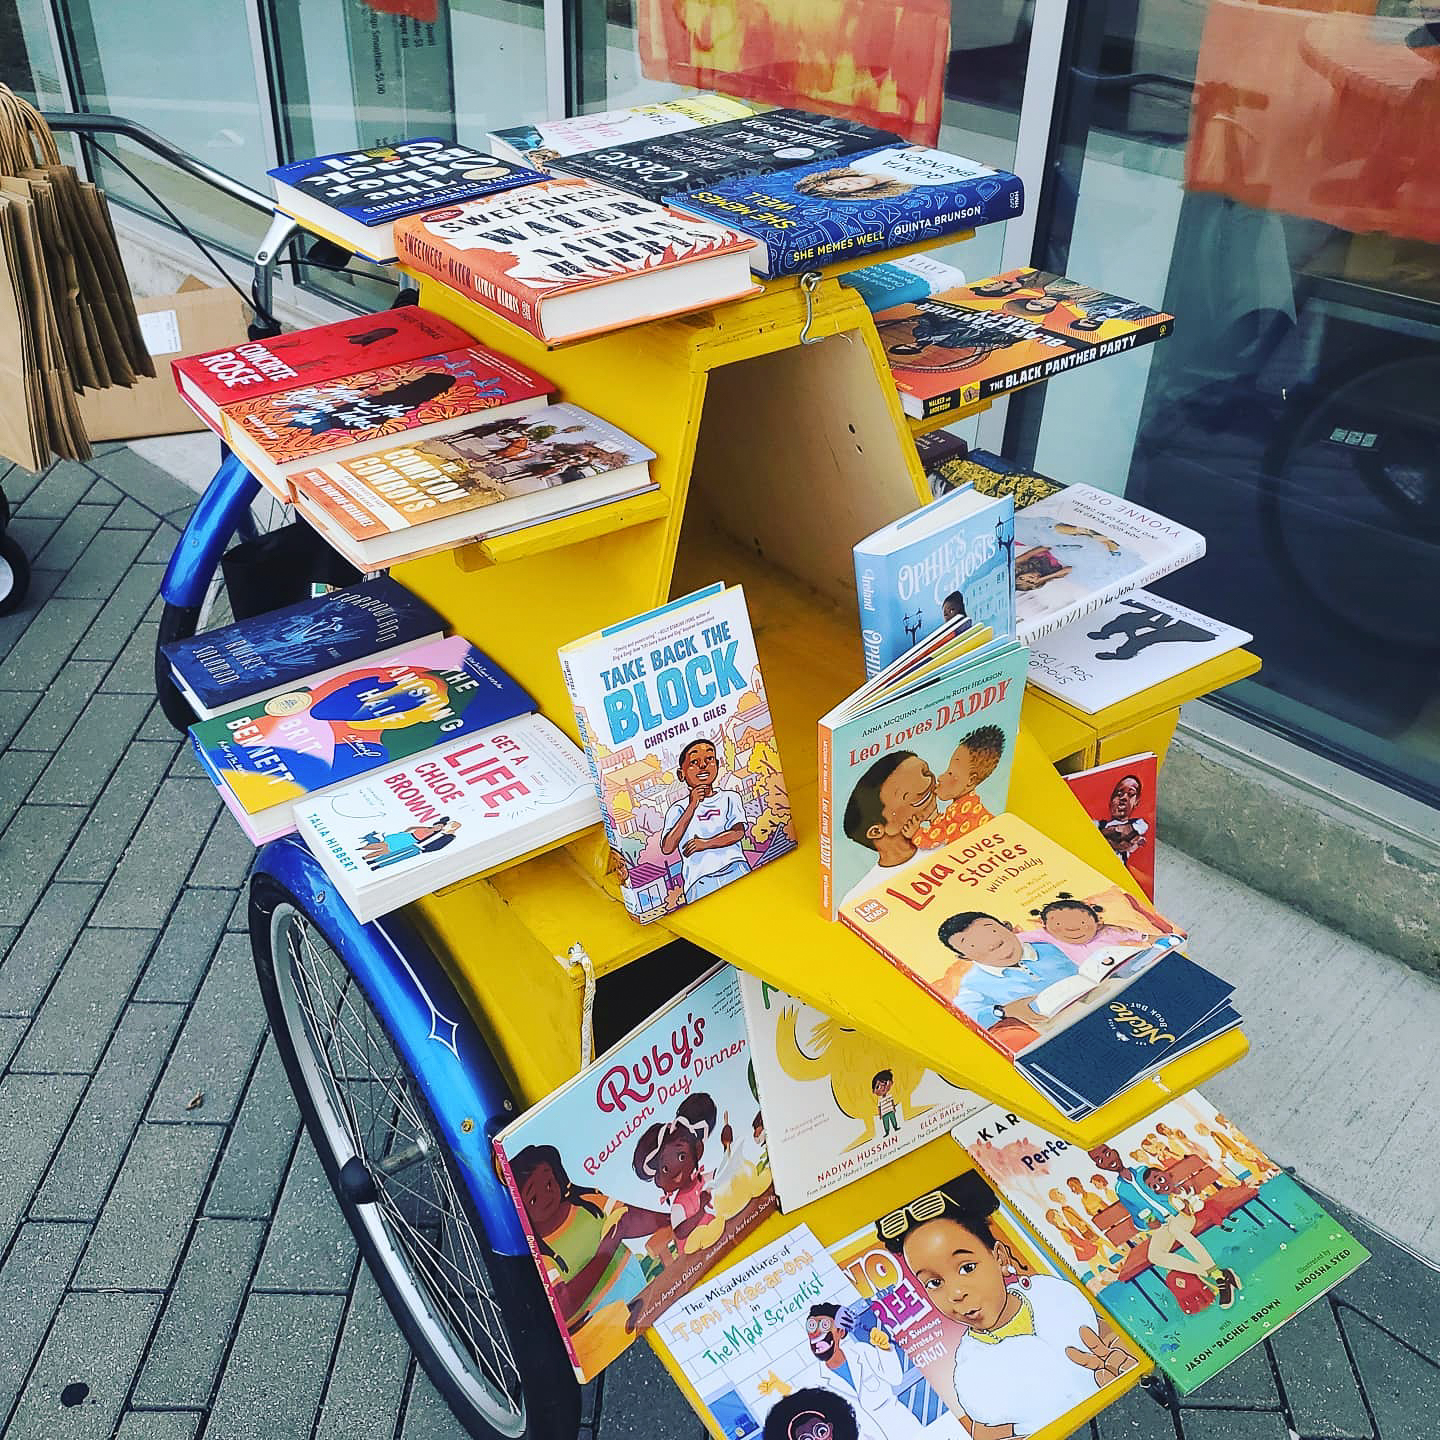 A collection of books rest on a handmade, rigged bike shelf for a mobile bookstore. The yellow shelf rests on the back of a blue three-wheeler bicycle.